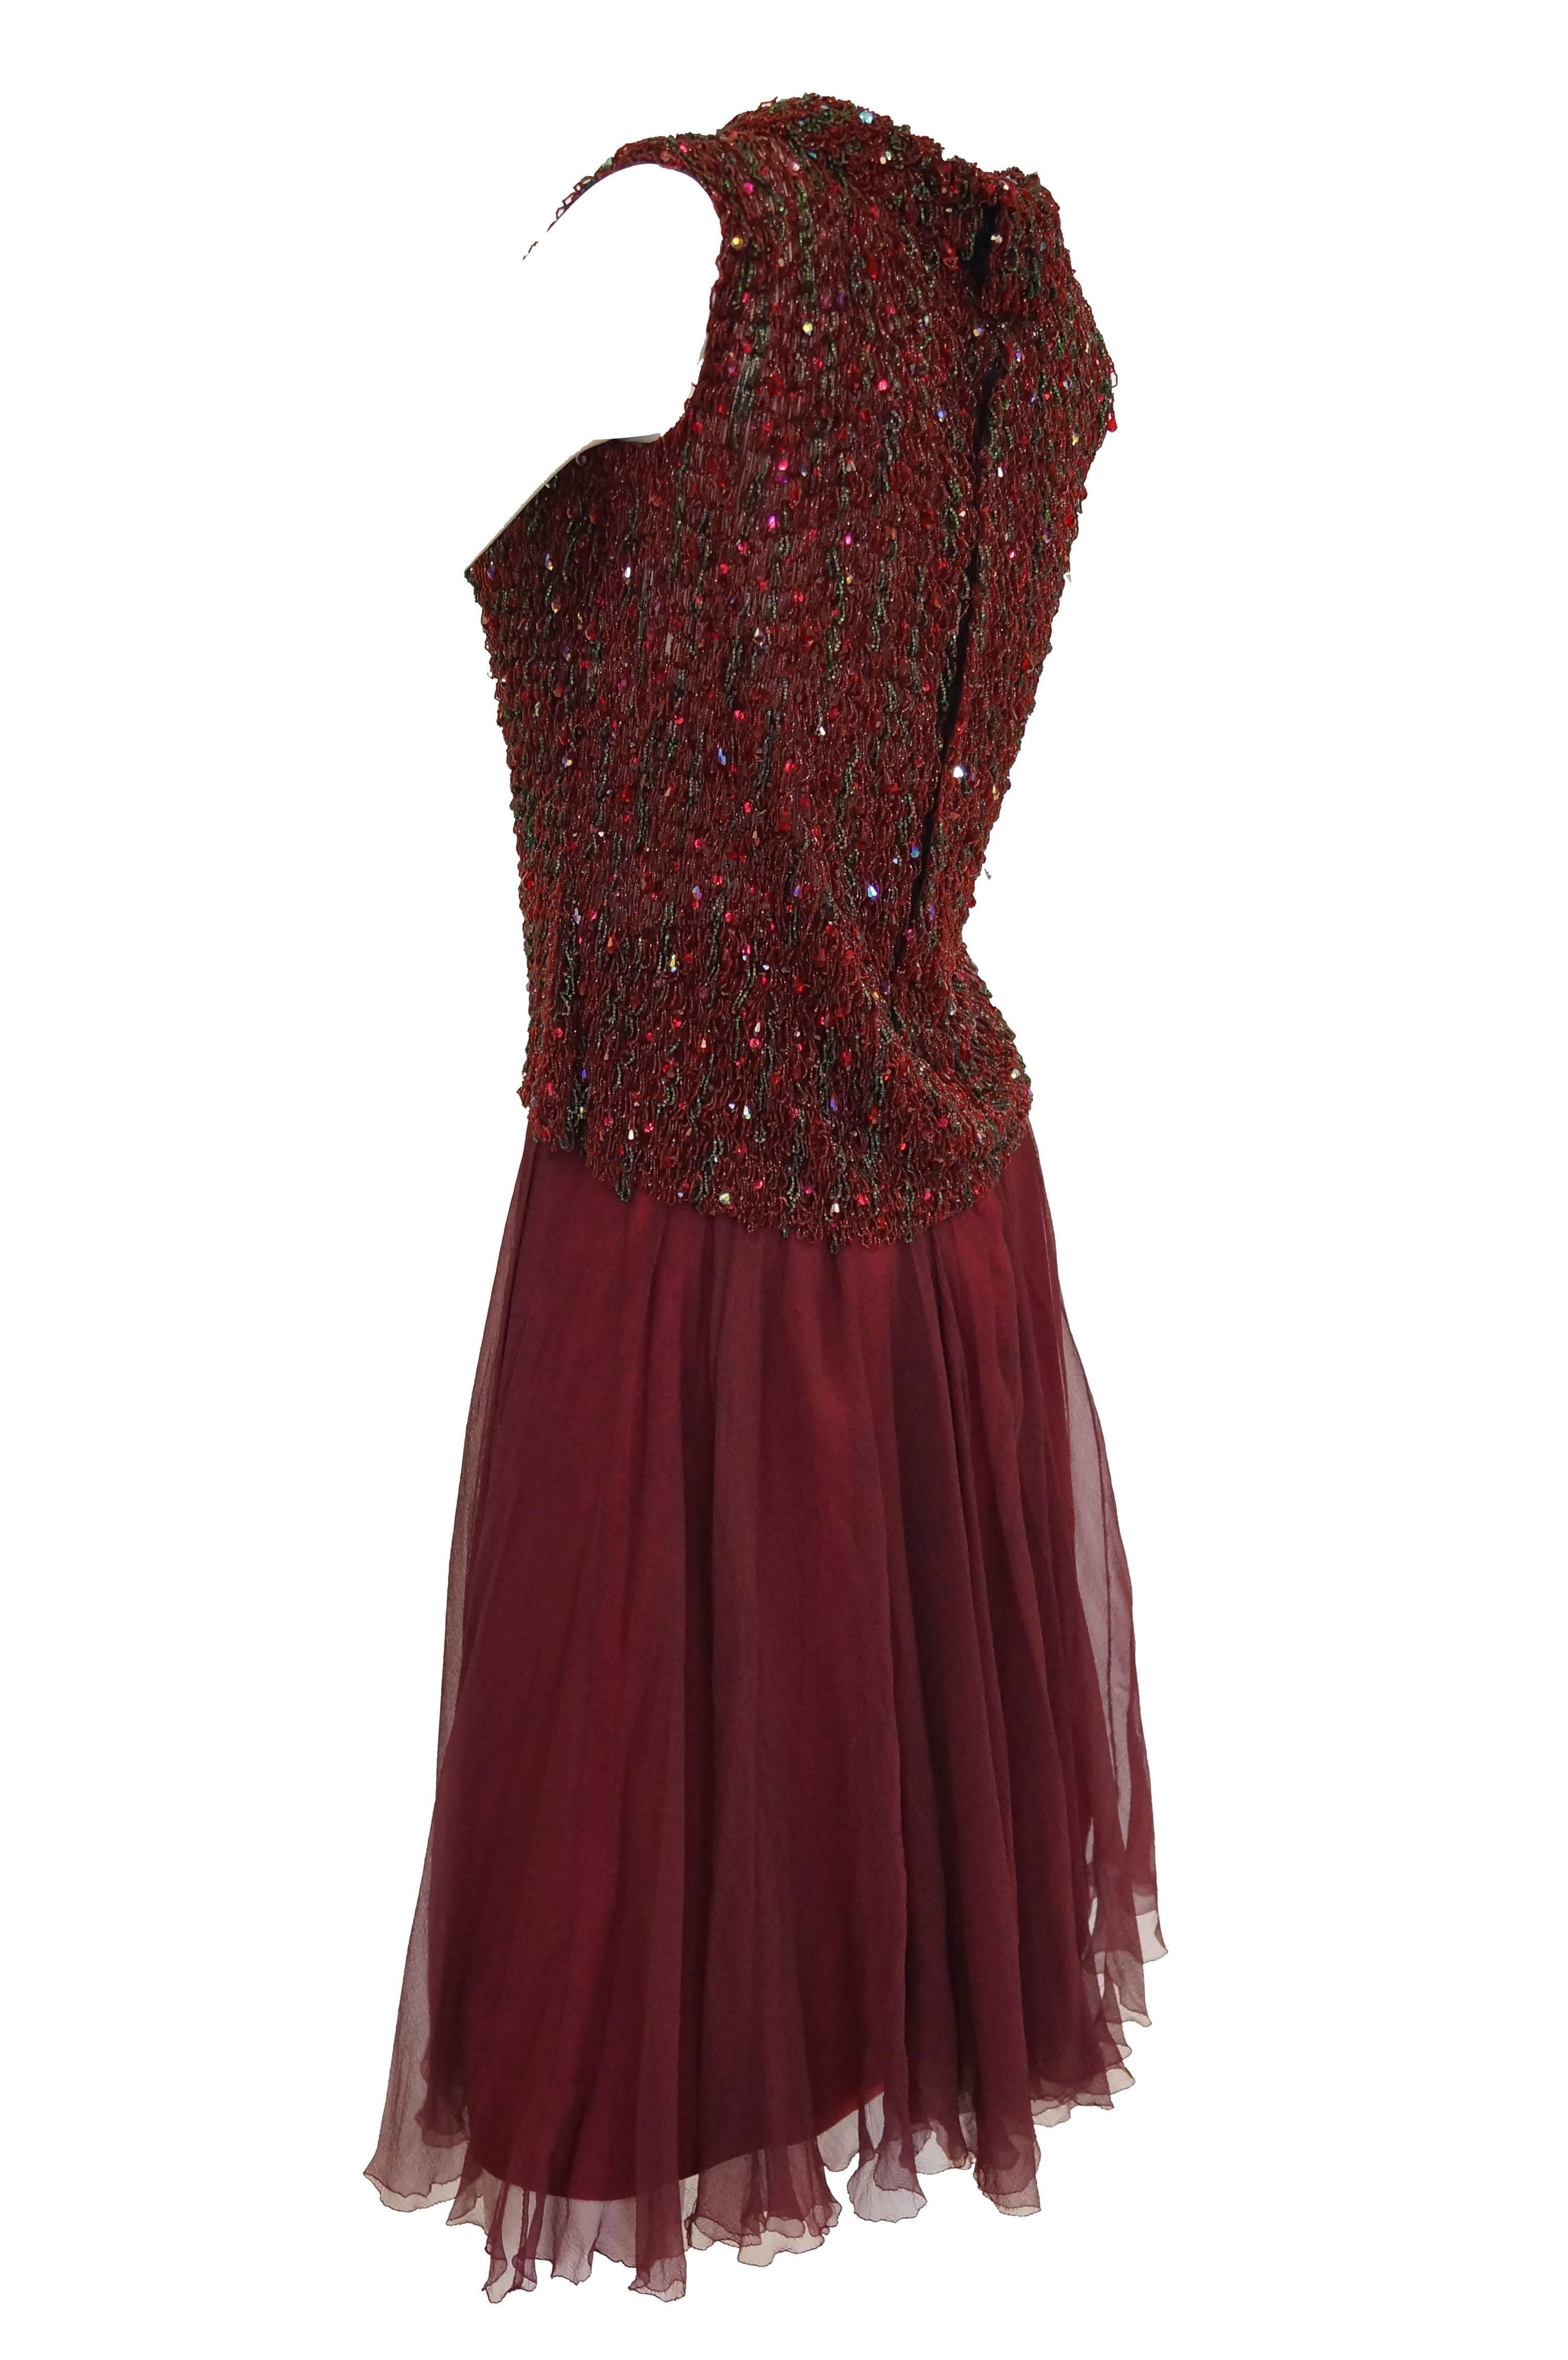 Yves Saint Laurent Couture Evening Dress Owned by Claudette Colbert, 1963  In Excellent Condition For Sale In Houston, TX